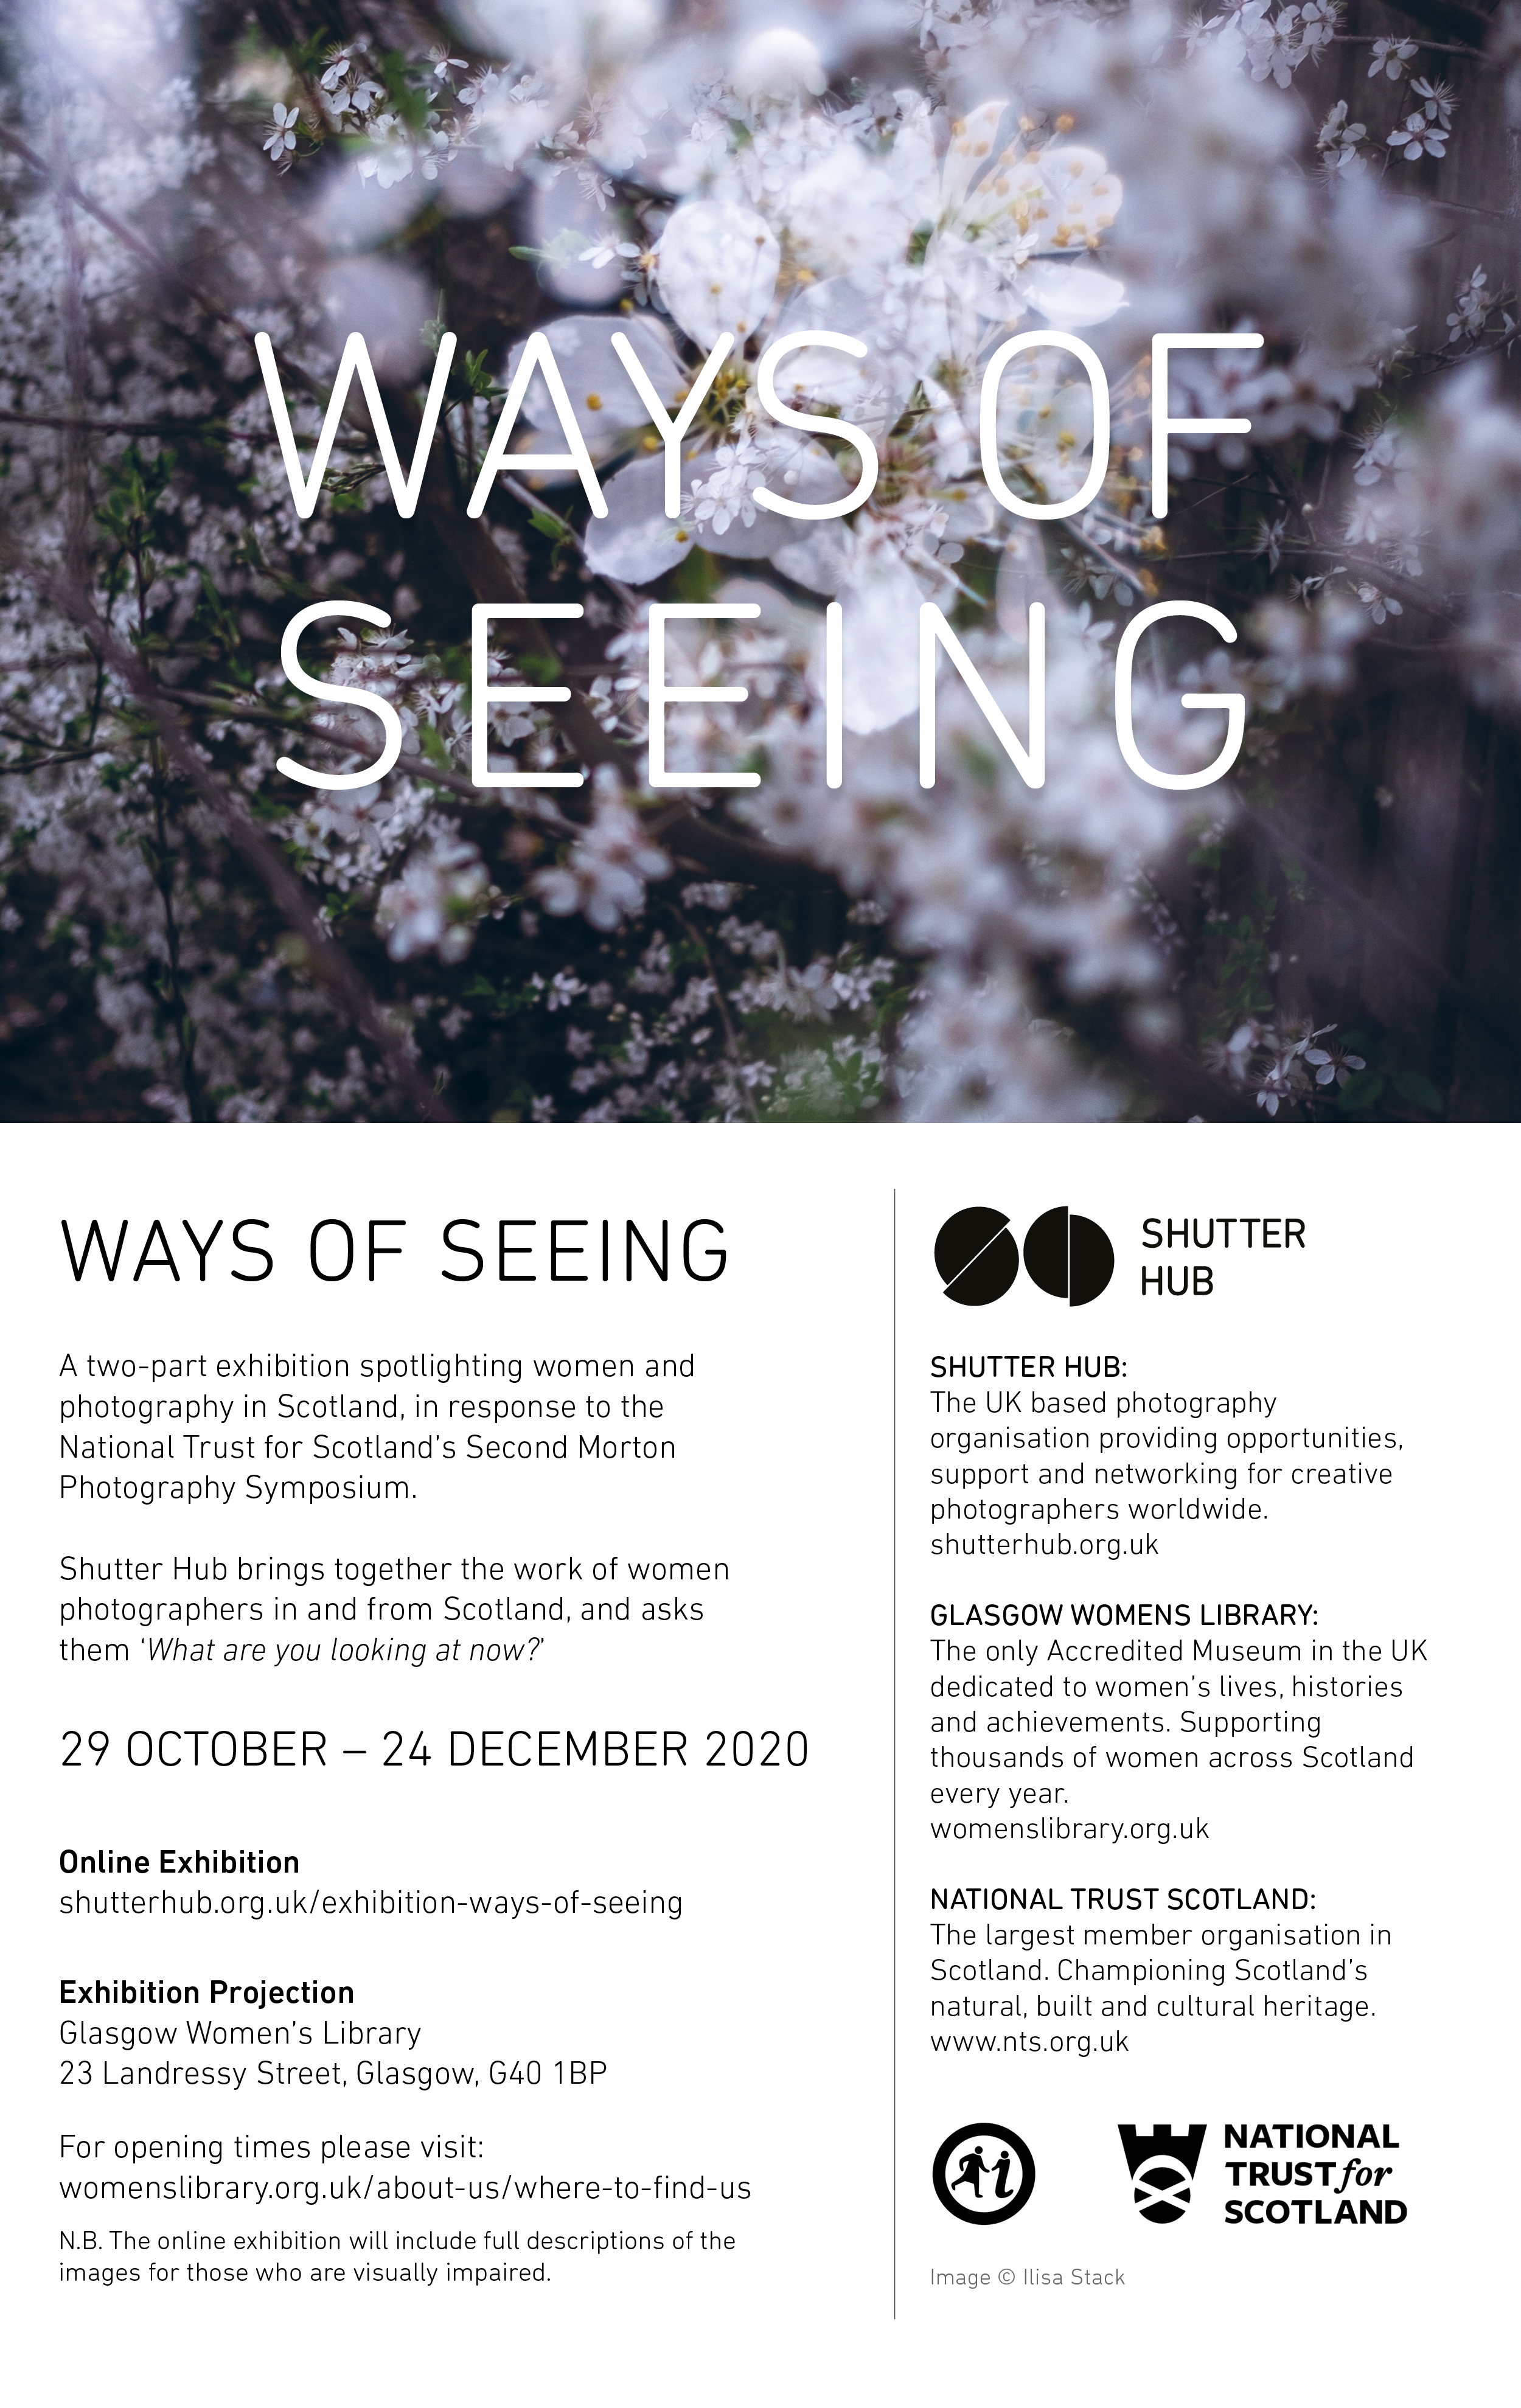 Ways of Seeing exhibition flyer with information about the online exhibition. The information is repeated in text-form on the blog post.